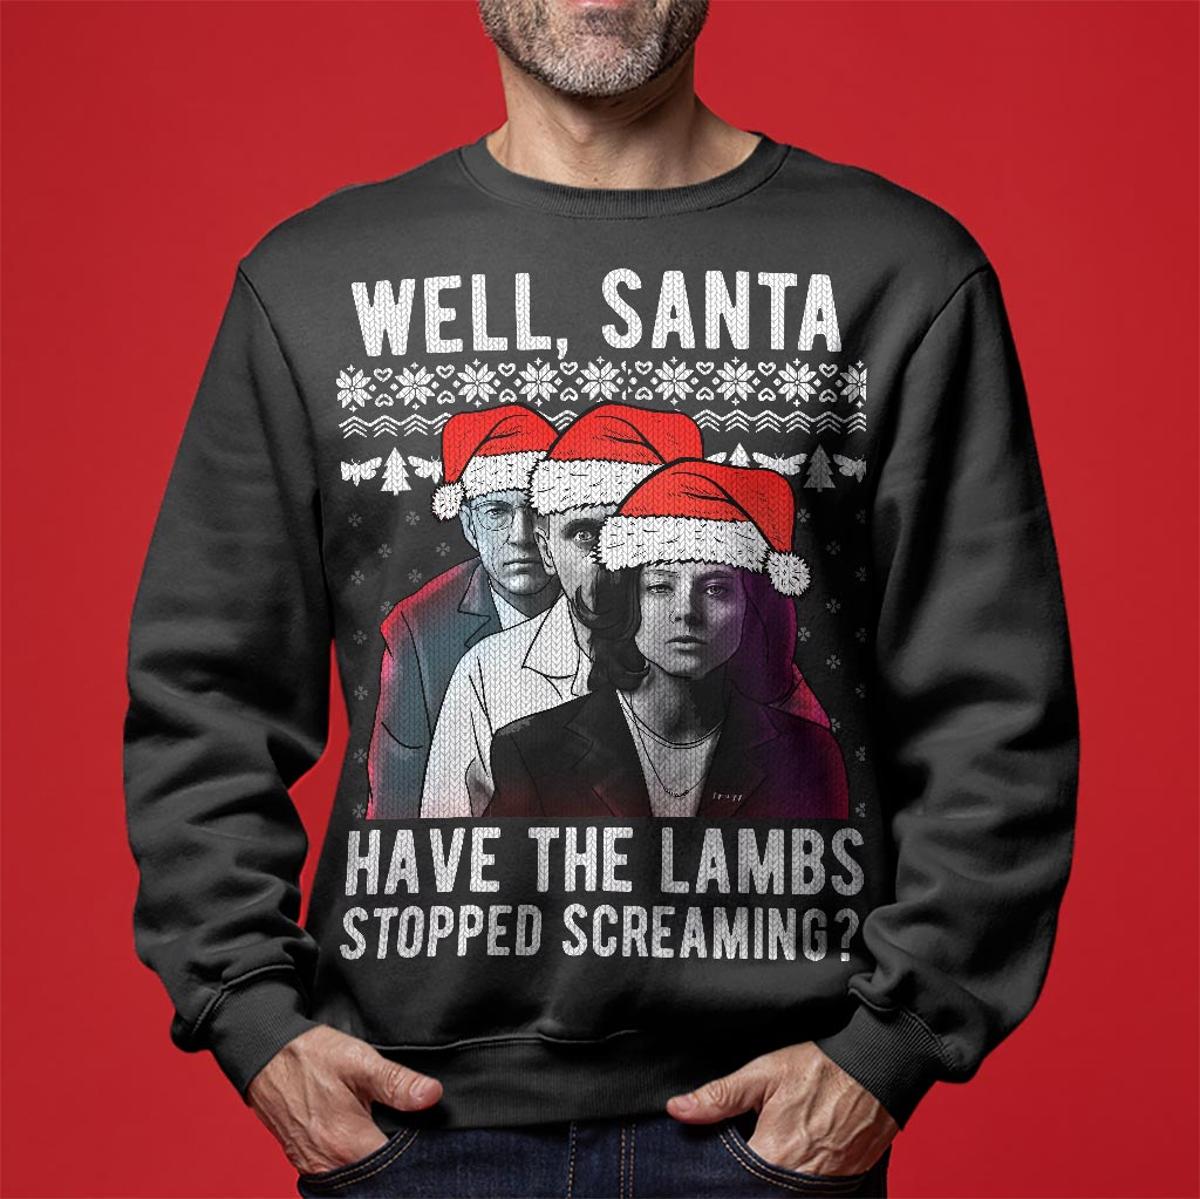 Ugly Sweaters National Lampoon Dad Explain Again